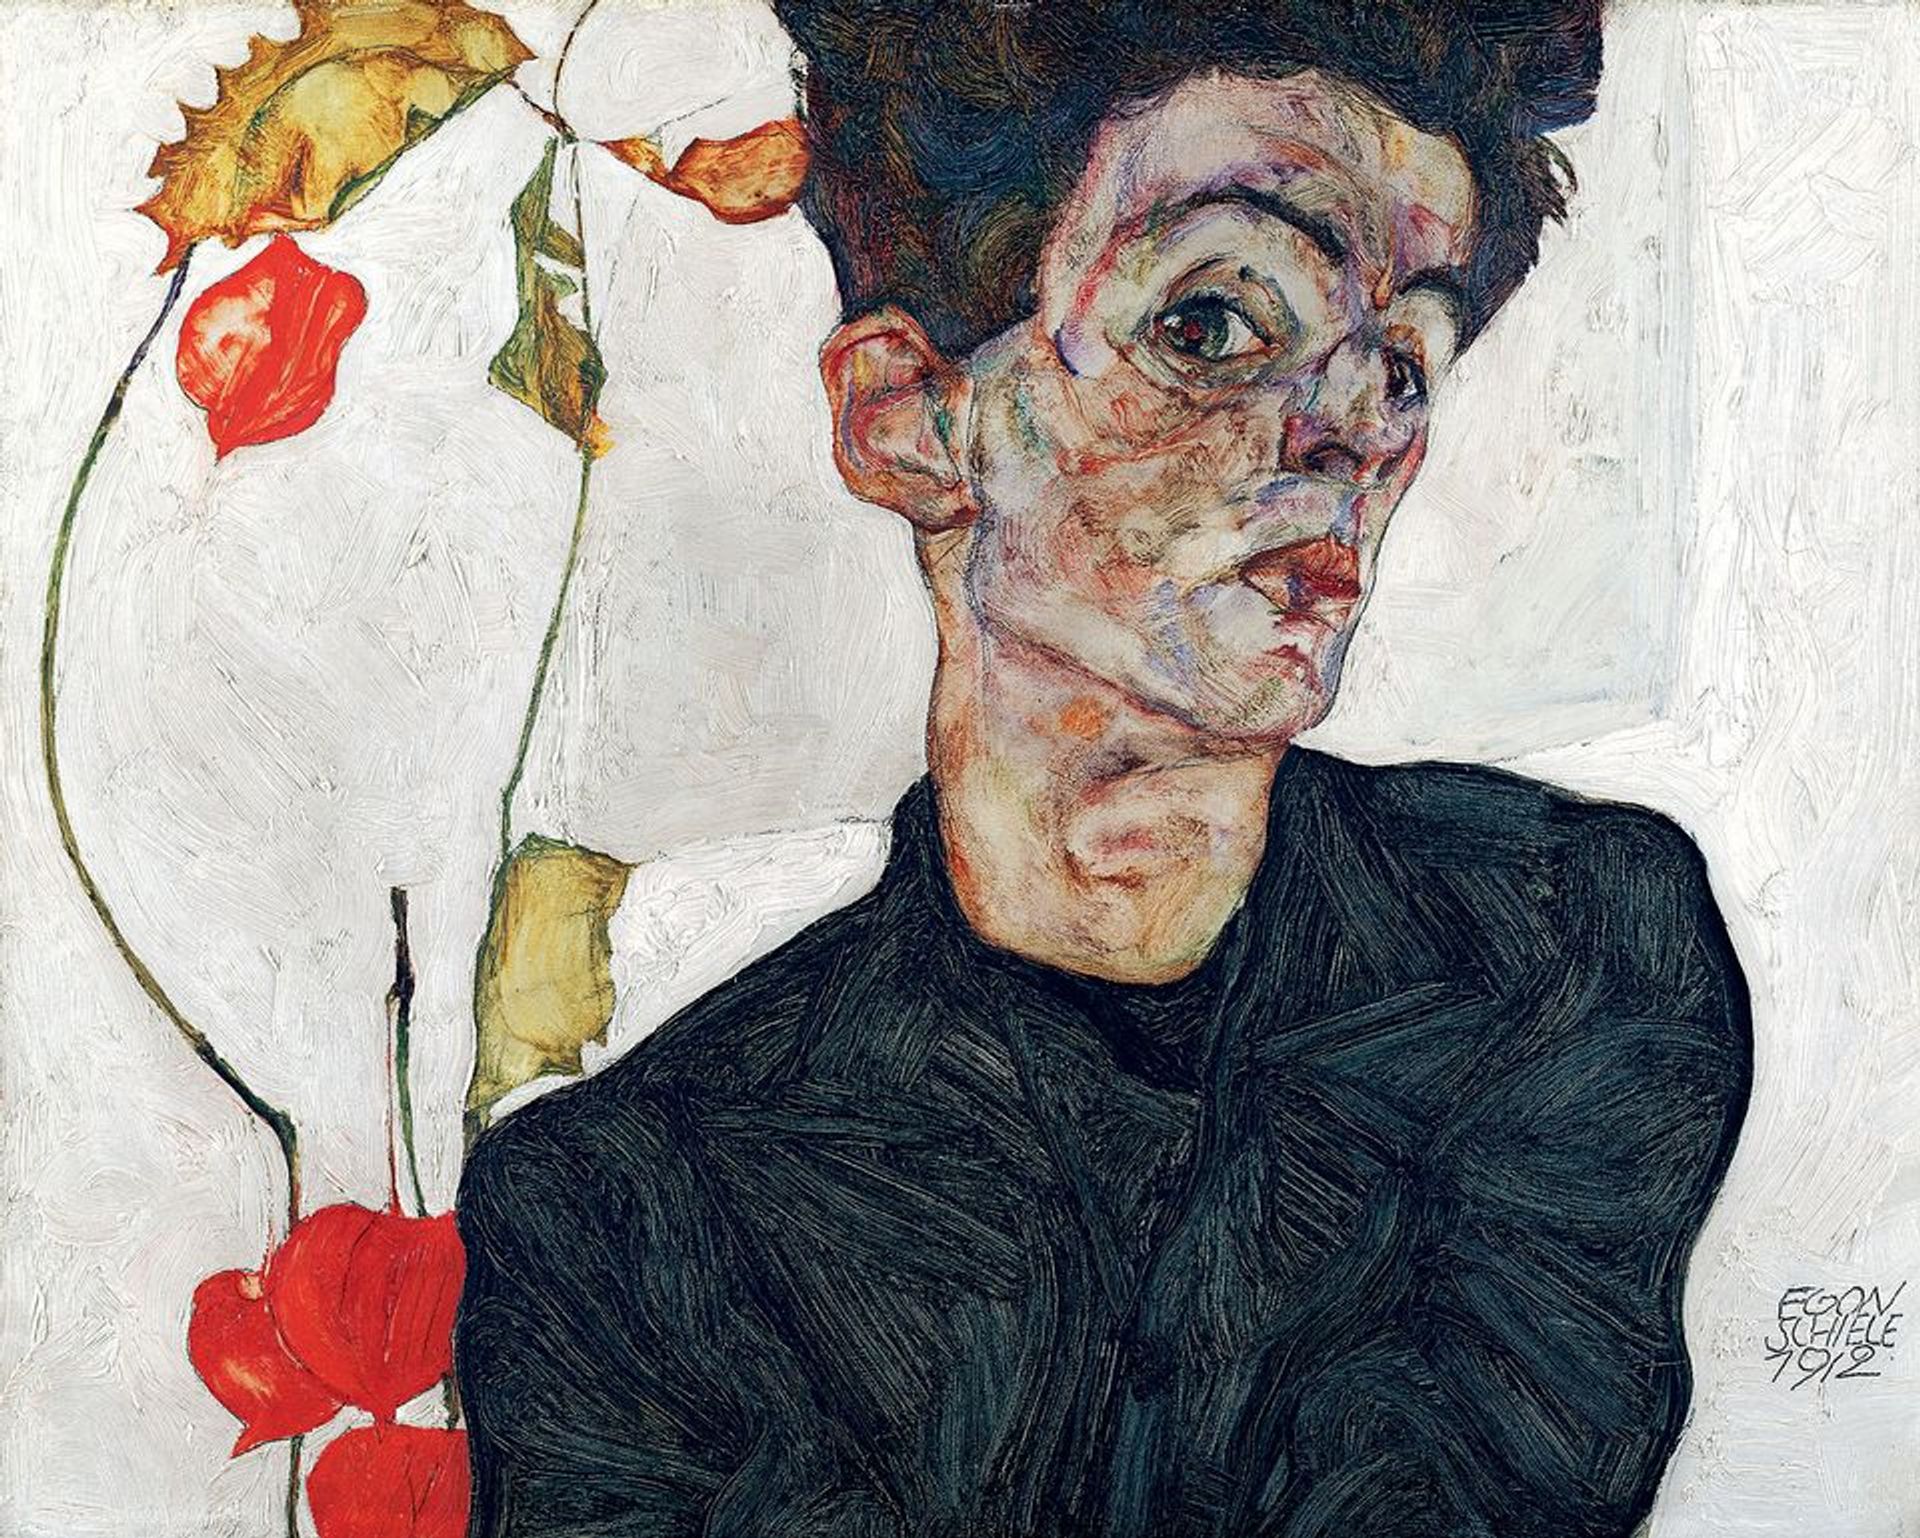 Egon Schiele, Self-Portrait with Chinese Lantern Plant (1912) Courtesy of the Leopold Museum, Vienna